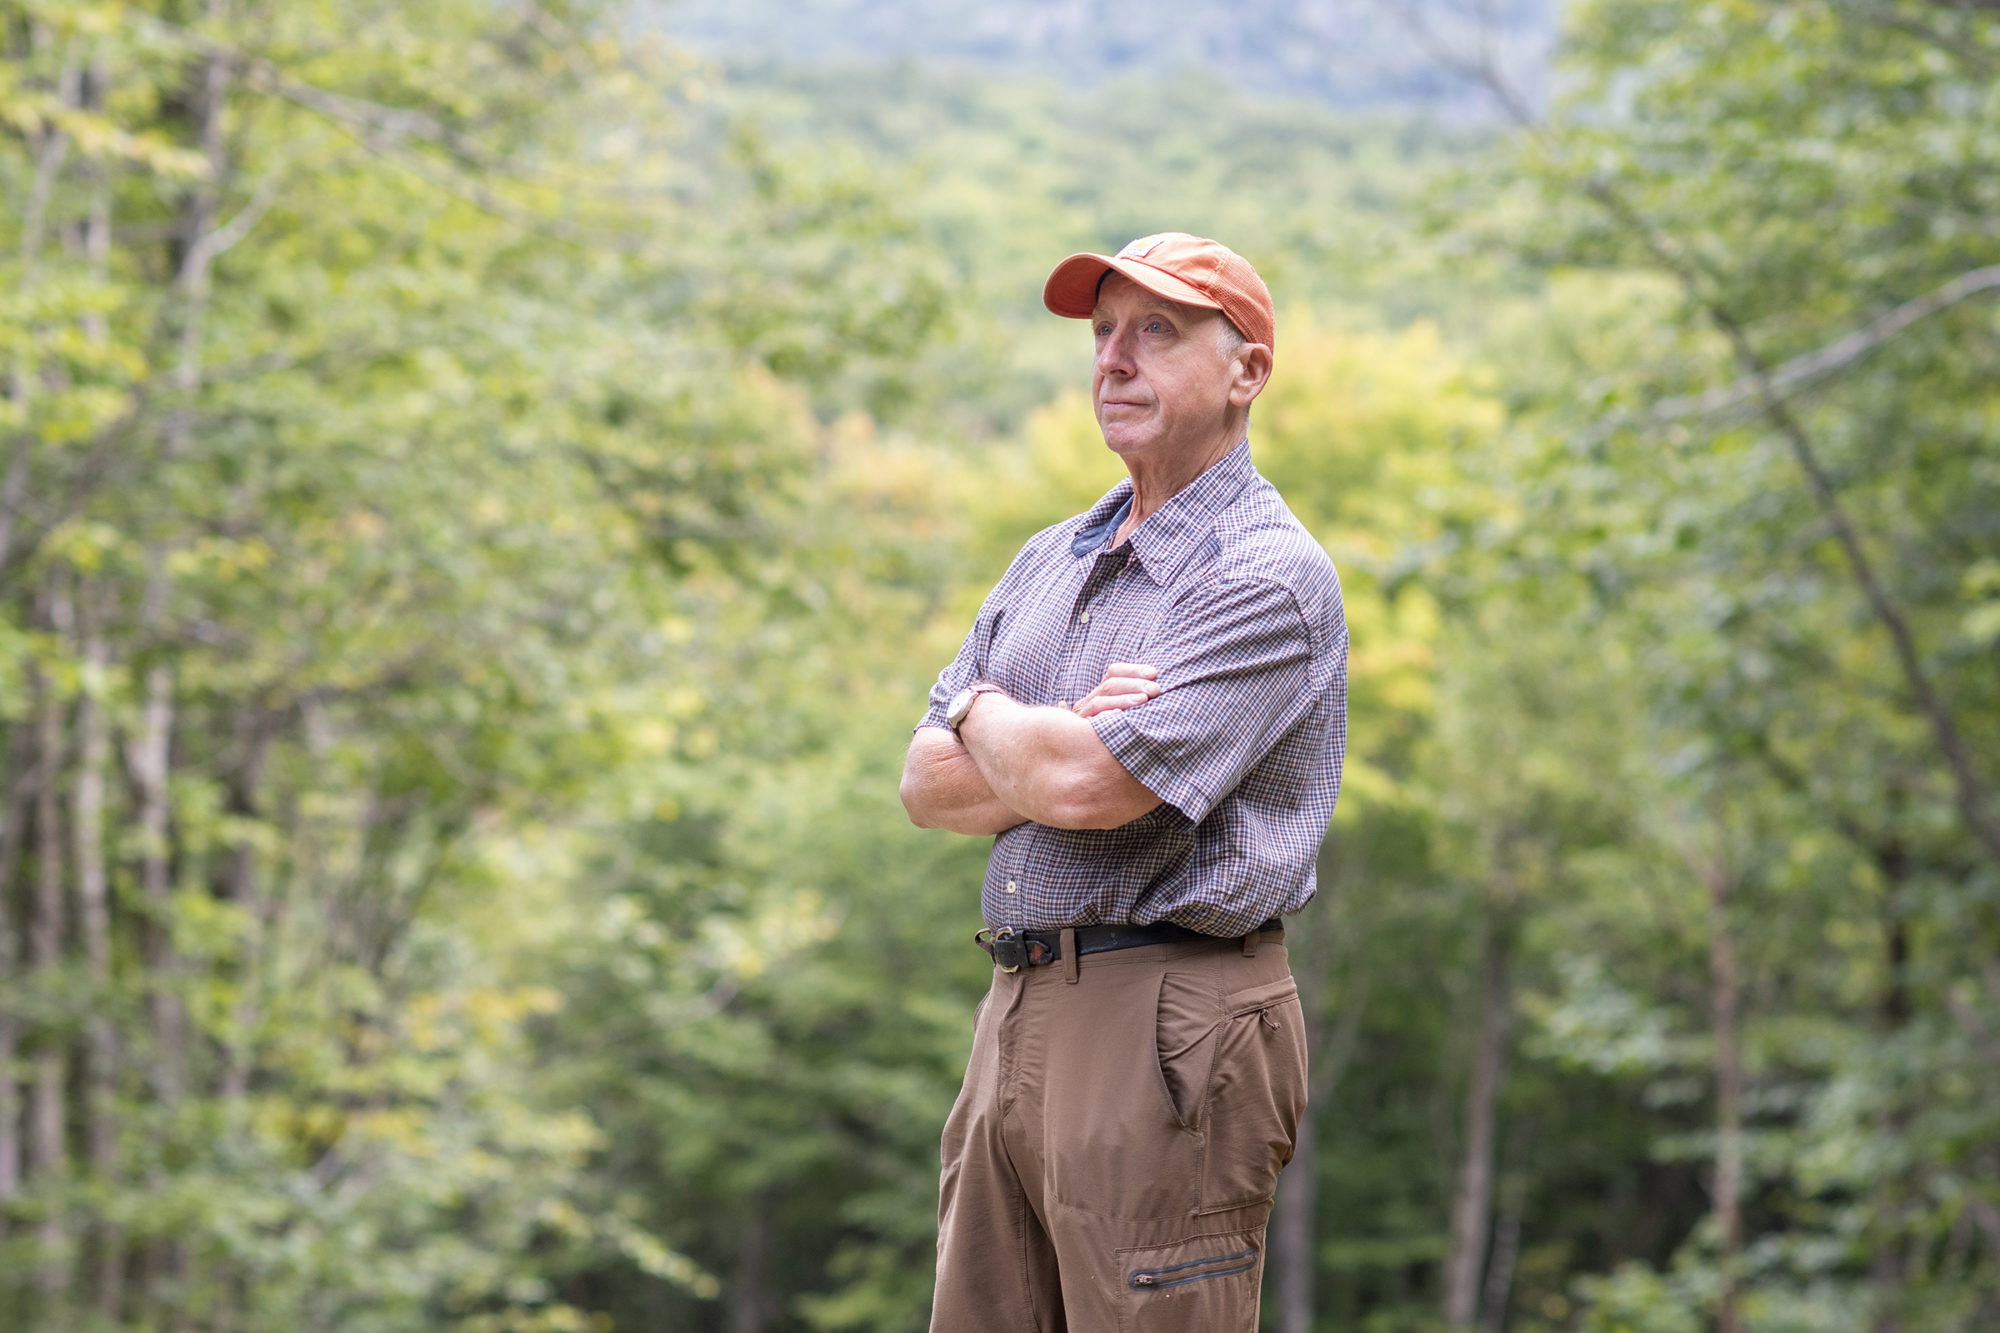 Tim Morton, stewardship forester for Windsor and Windham counties, estimates the area saw a fivefold increase in recreational use during the pandemic. Photo by Erica Houskeeper.